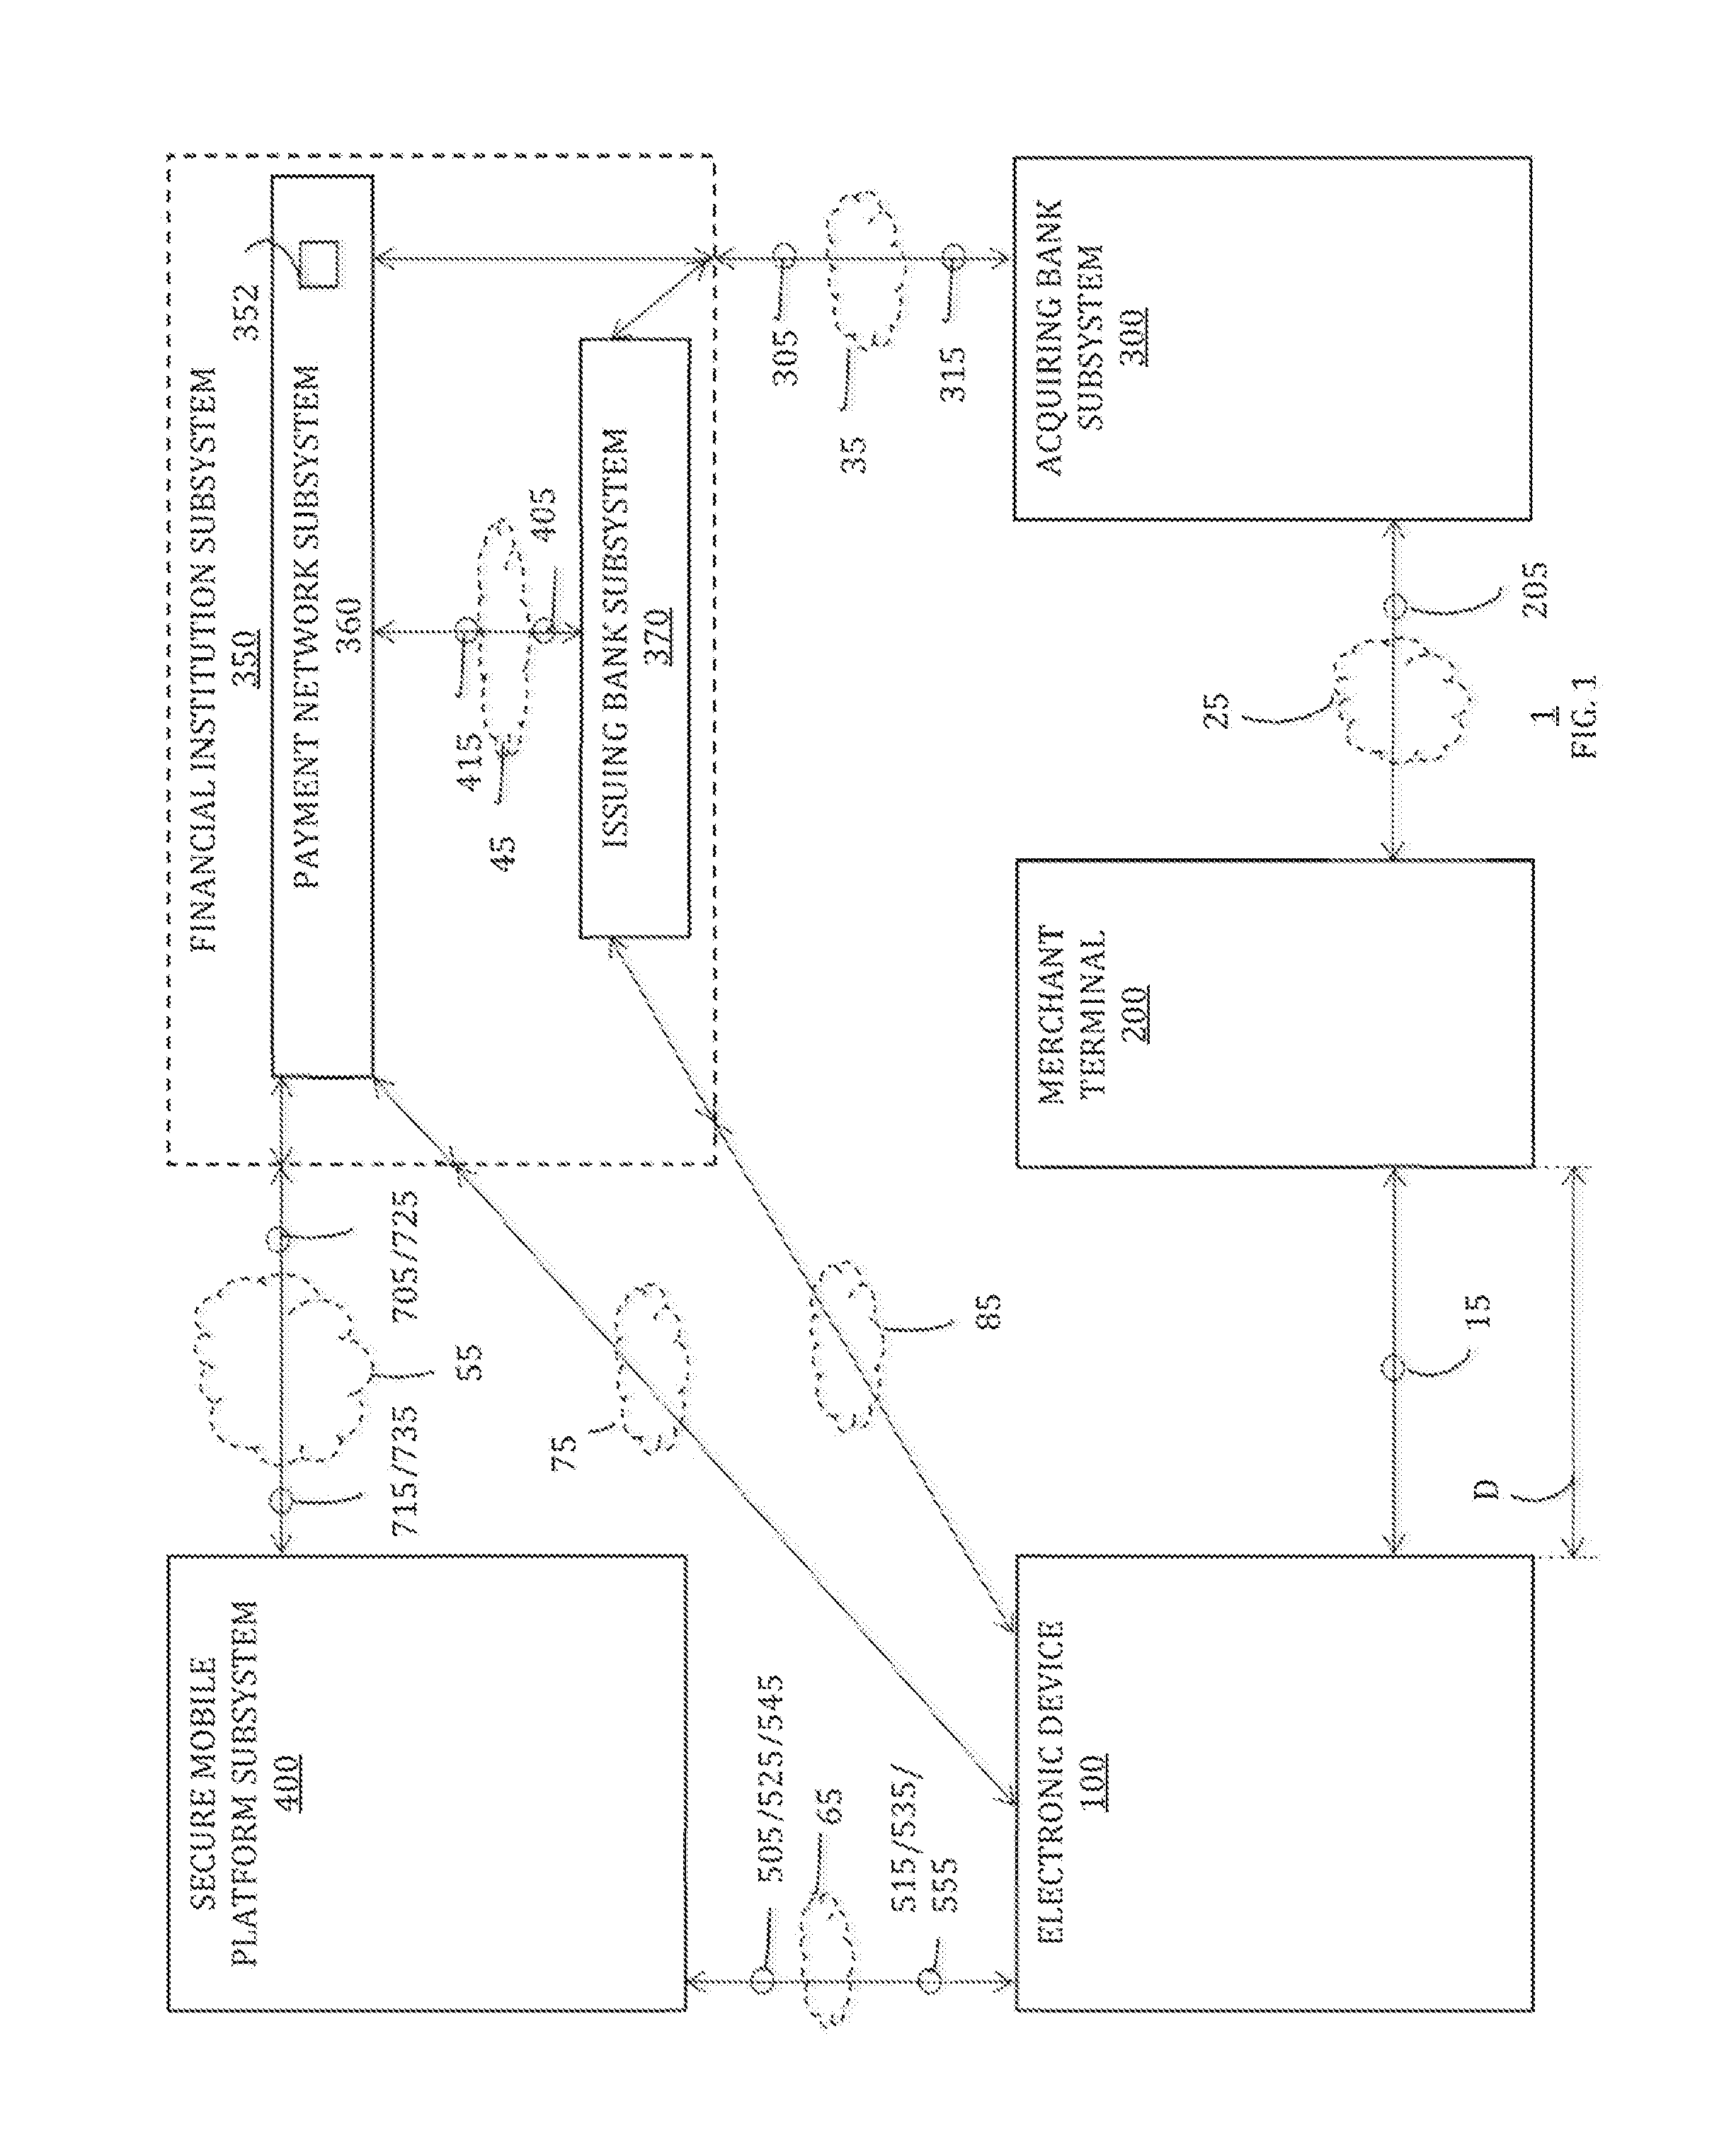 Secure provisioning of credentials on an electronic device